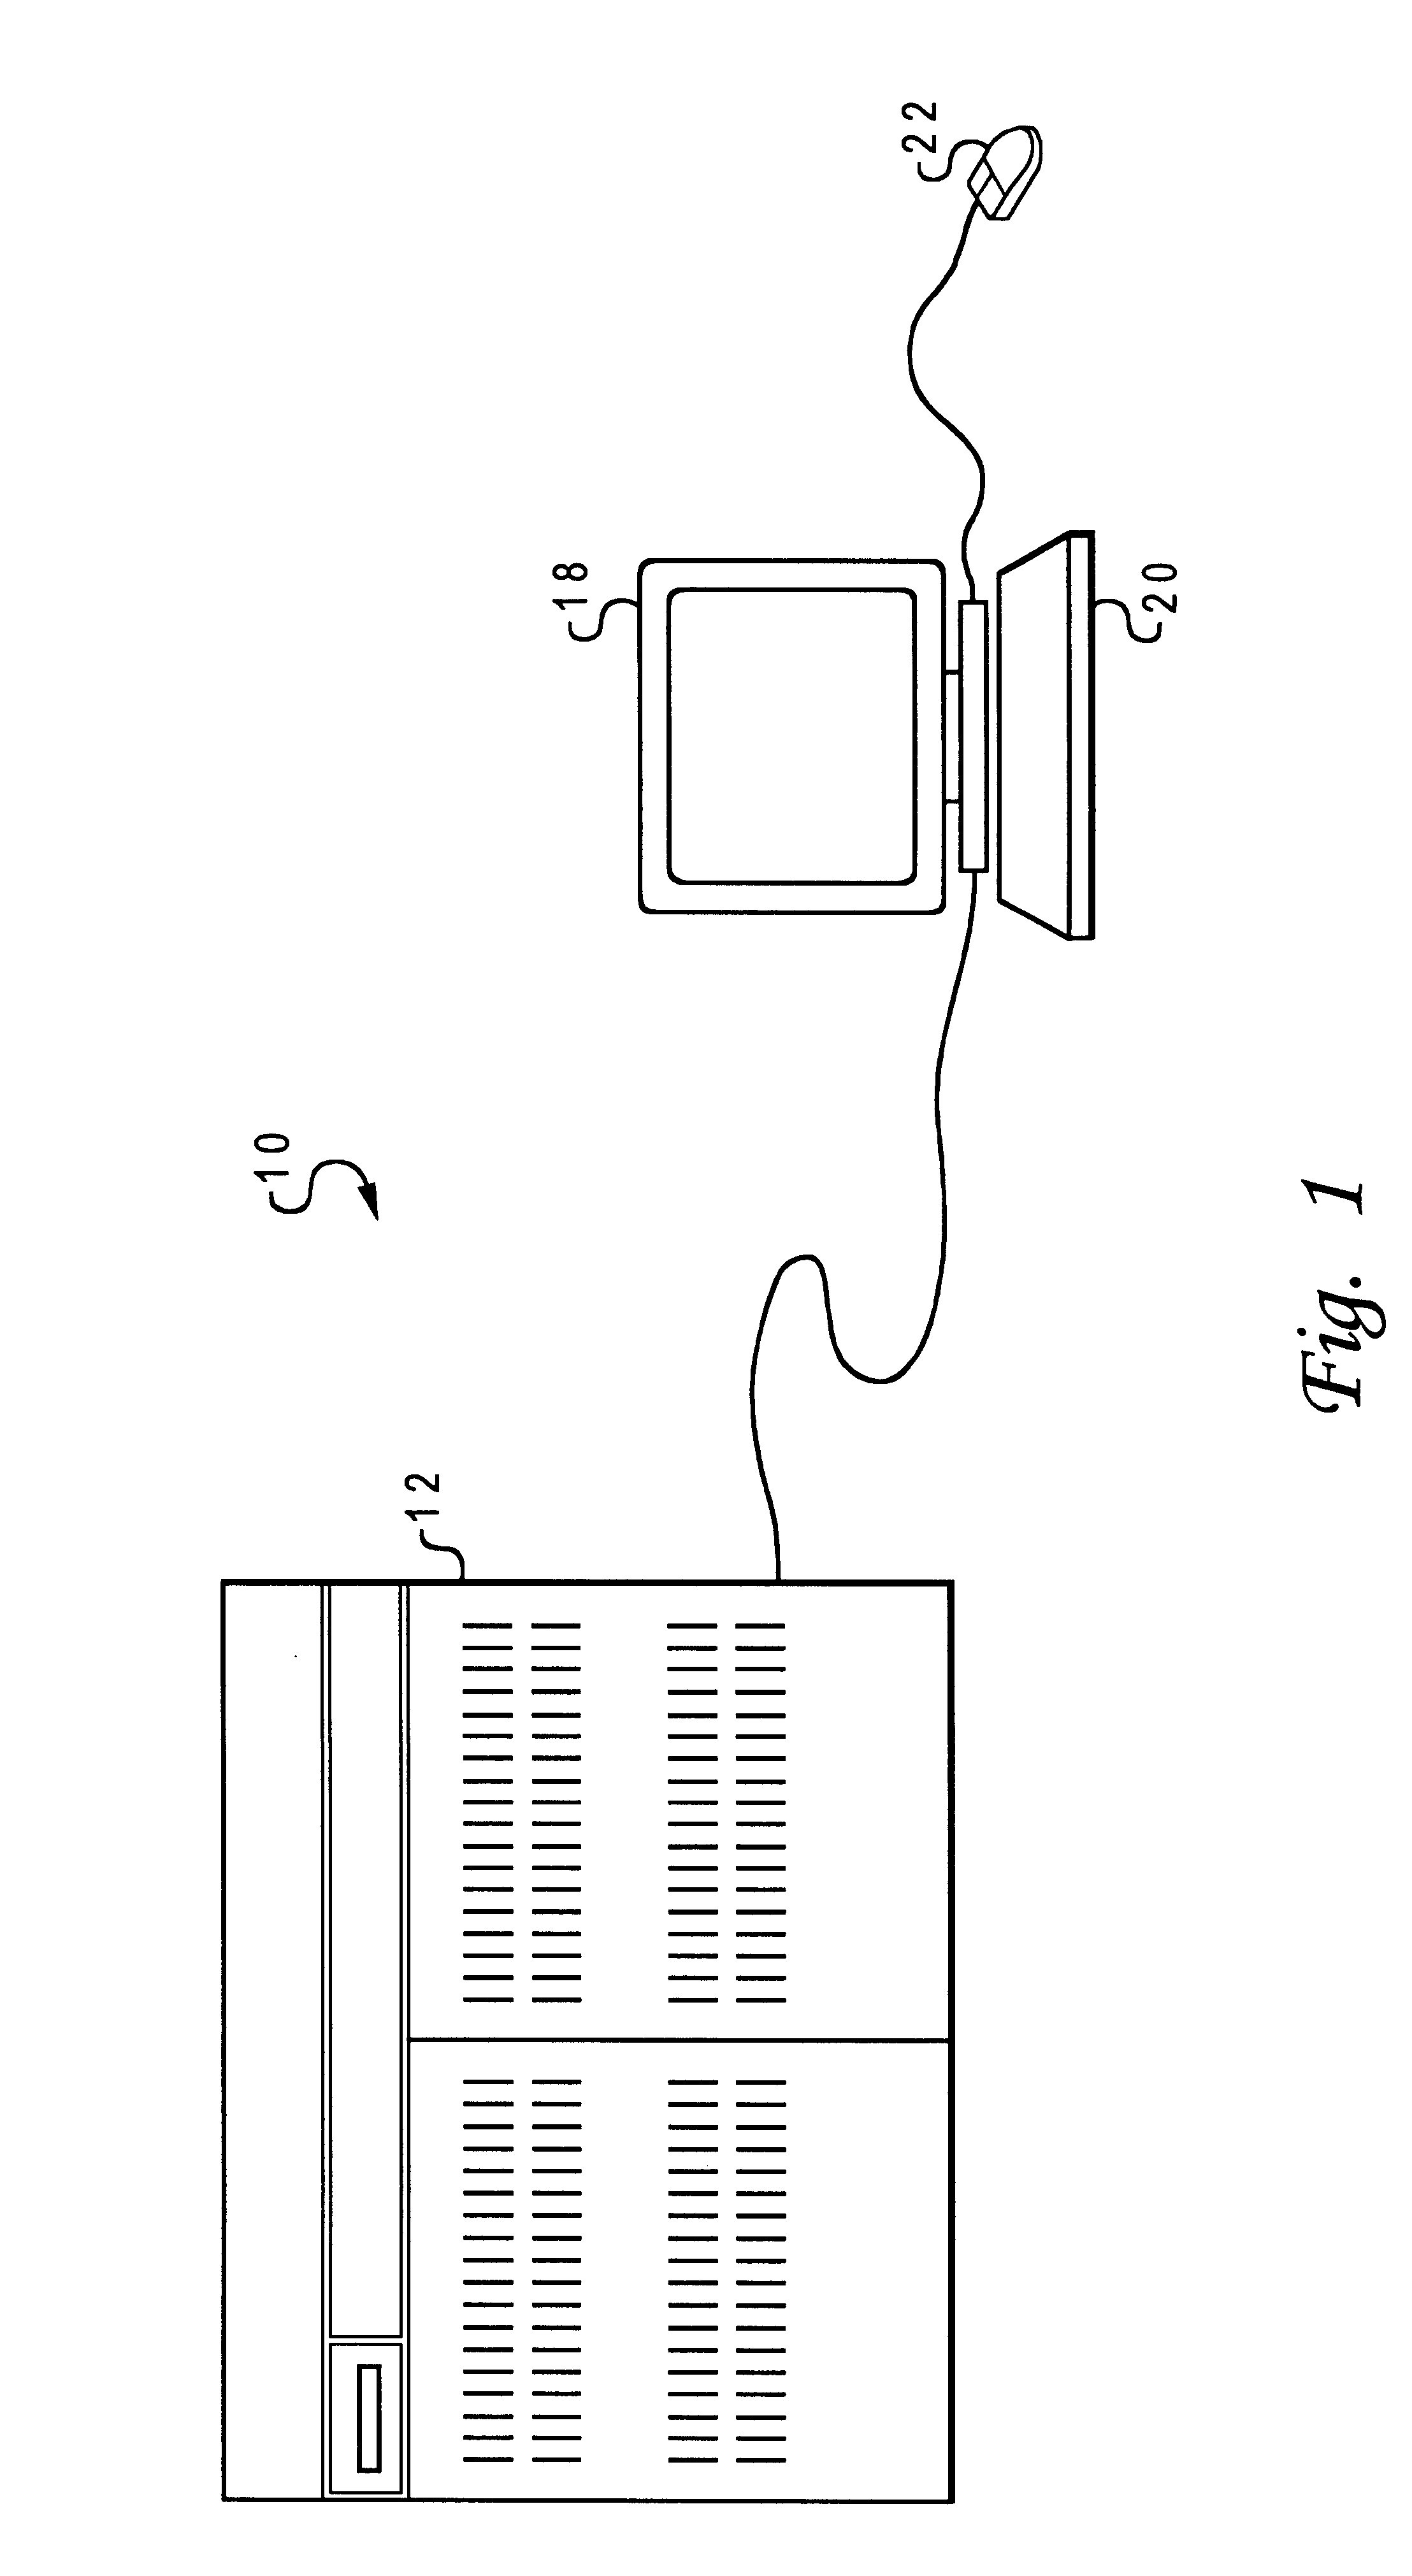 System for tracing hardware counters utilizing programmed performance monitor to generate trace interrupt after each branch instruction or at the end of each code basic block